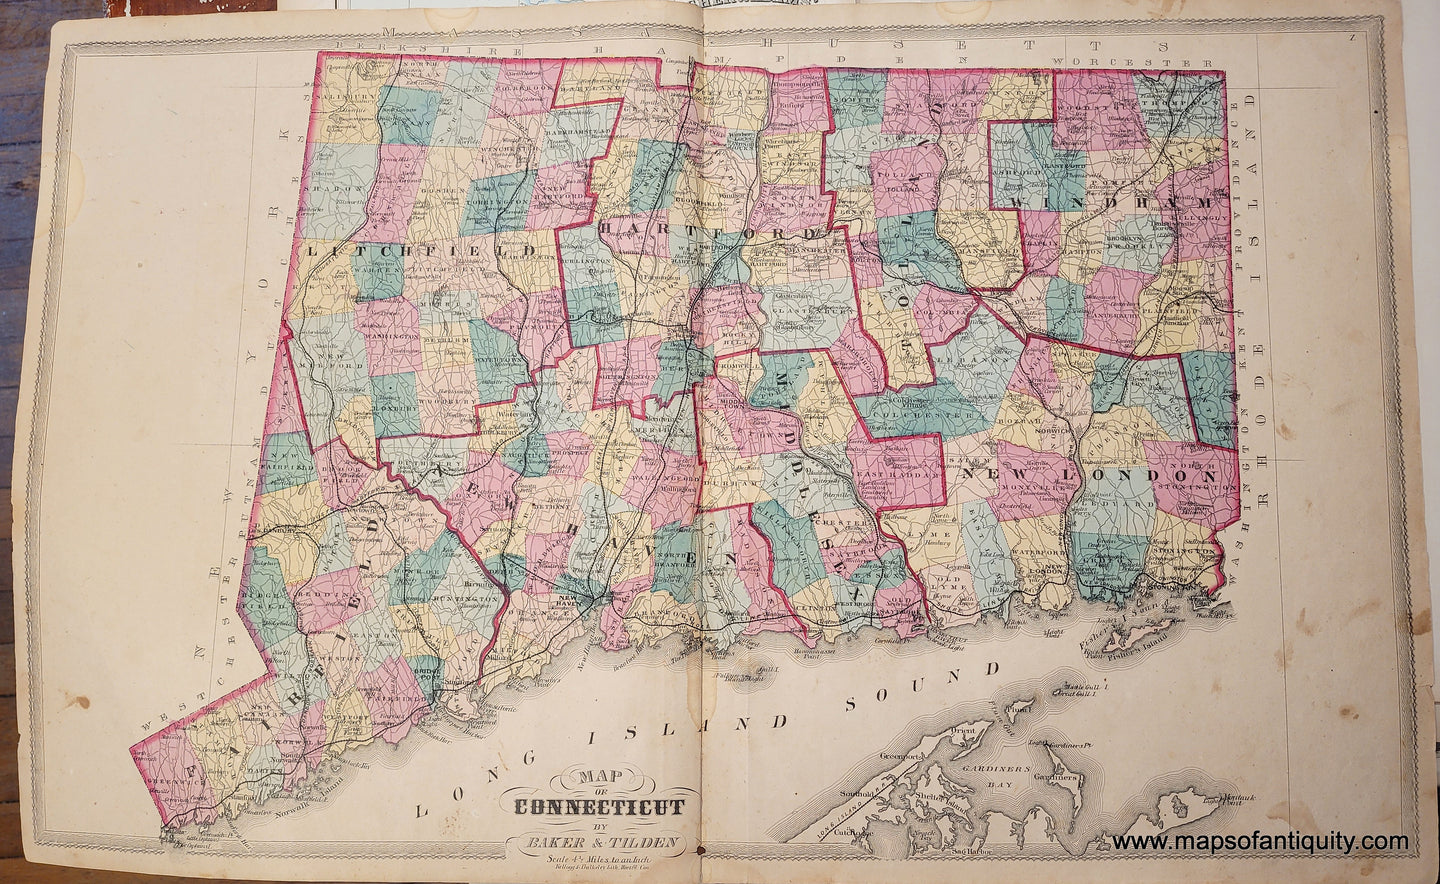 Antique-Hand-Colored-Map-Map-of-Connecticut-by-Baker-&-Tilden-Connecticut-Northeast-1869-Baker-&-Tilden-Maps-Of-Antiquity